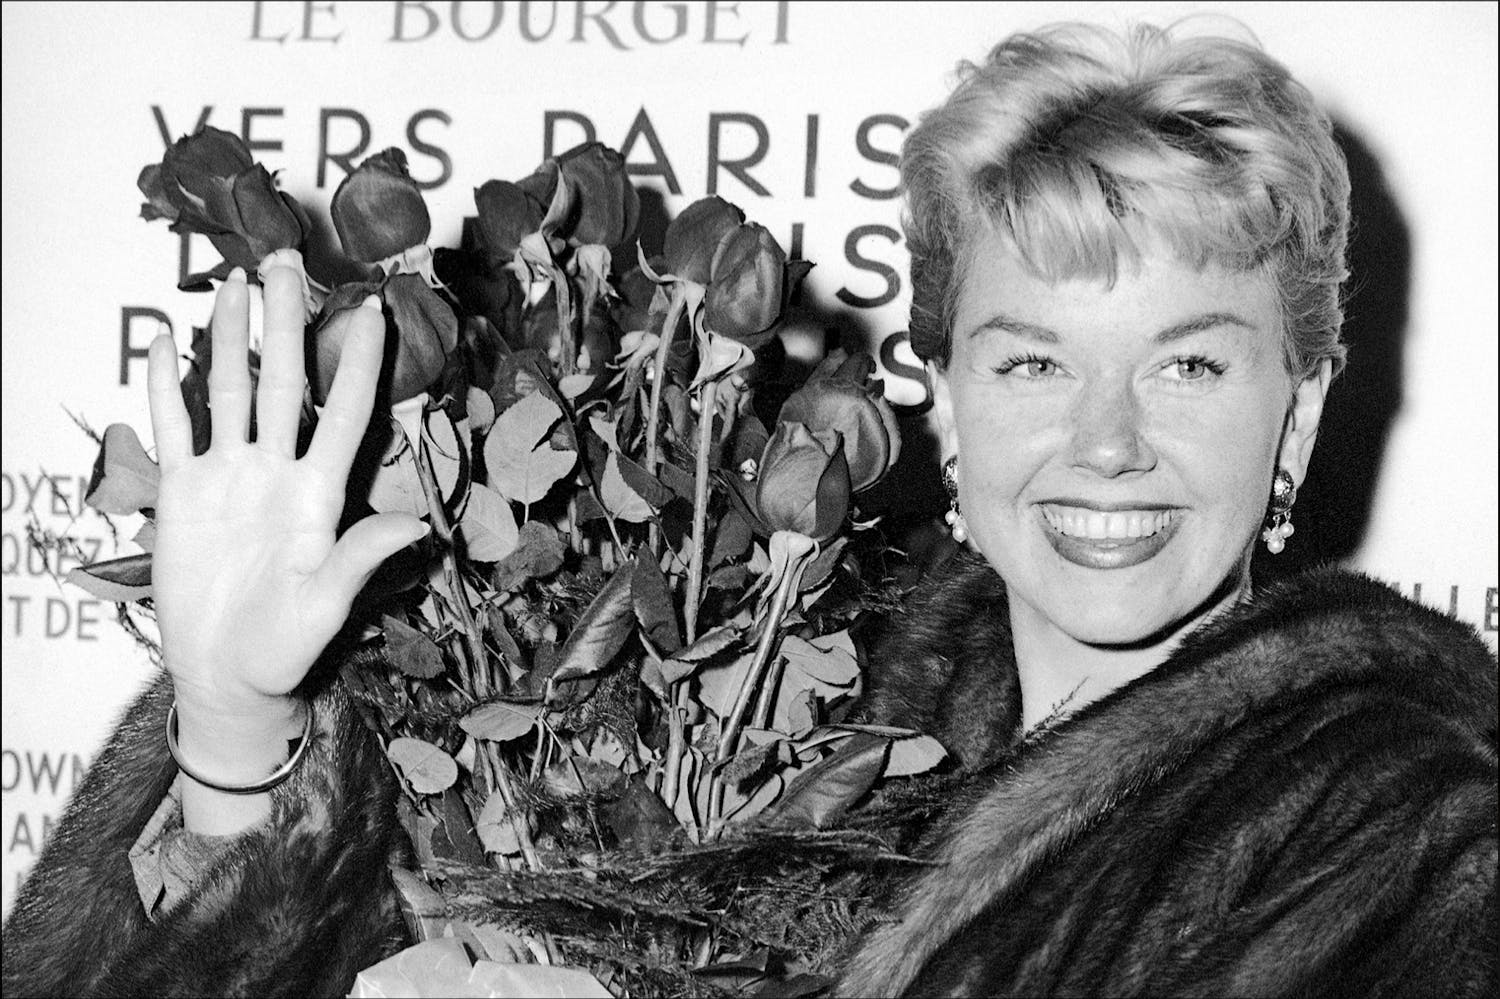 In this April 15, 1955, file photo, American actress and singer Doris Day holds a bouquet of roses at Le Bourget Airport in Paris after flying in from London. The Doris Day Animal Foundation confirmed Day died early Monday, May 13, 2019, at her home in Carmel Valley, Calif. She was 97.